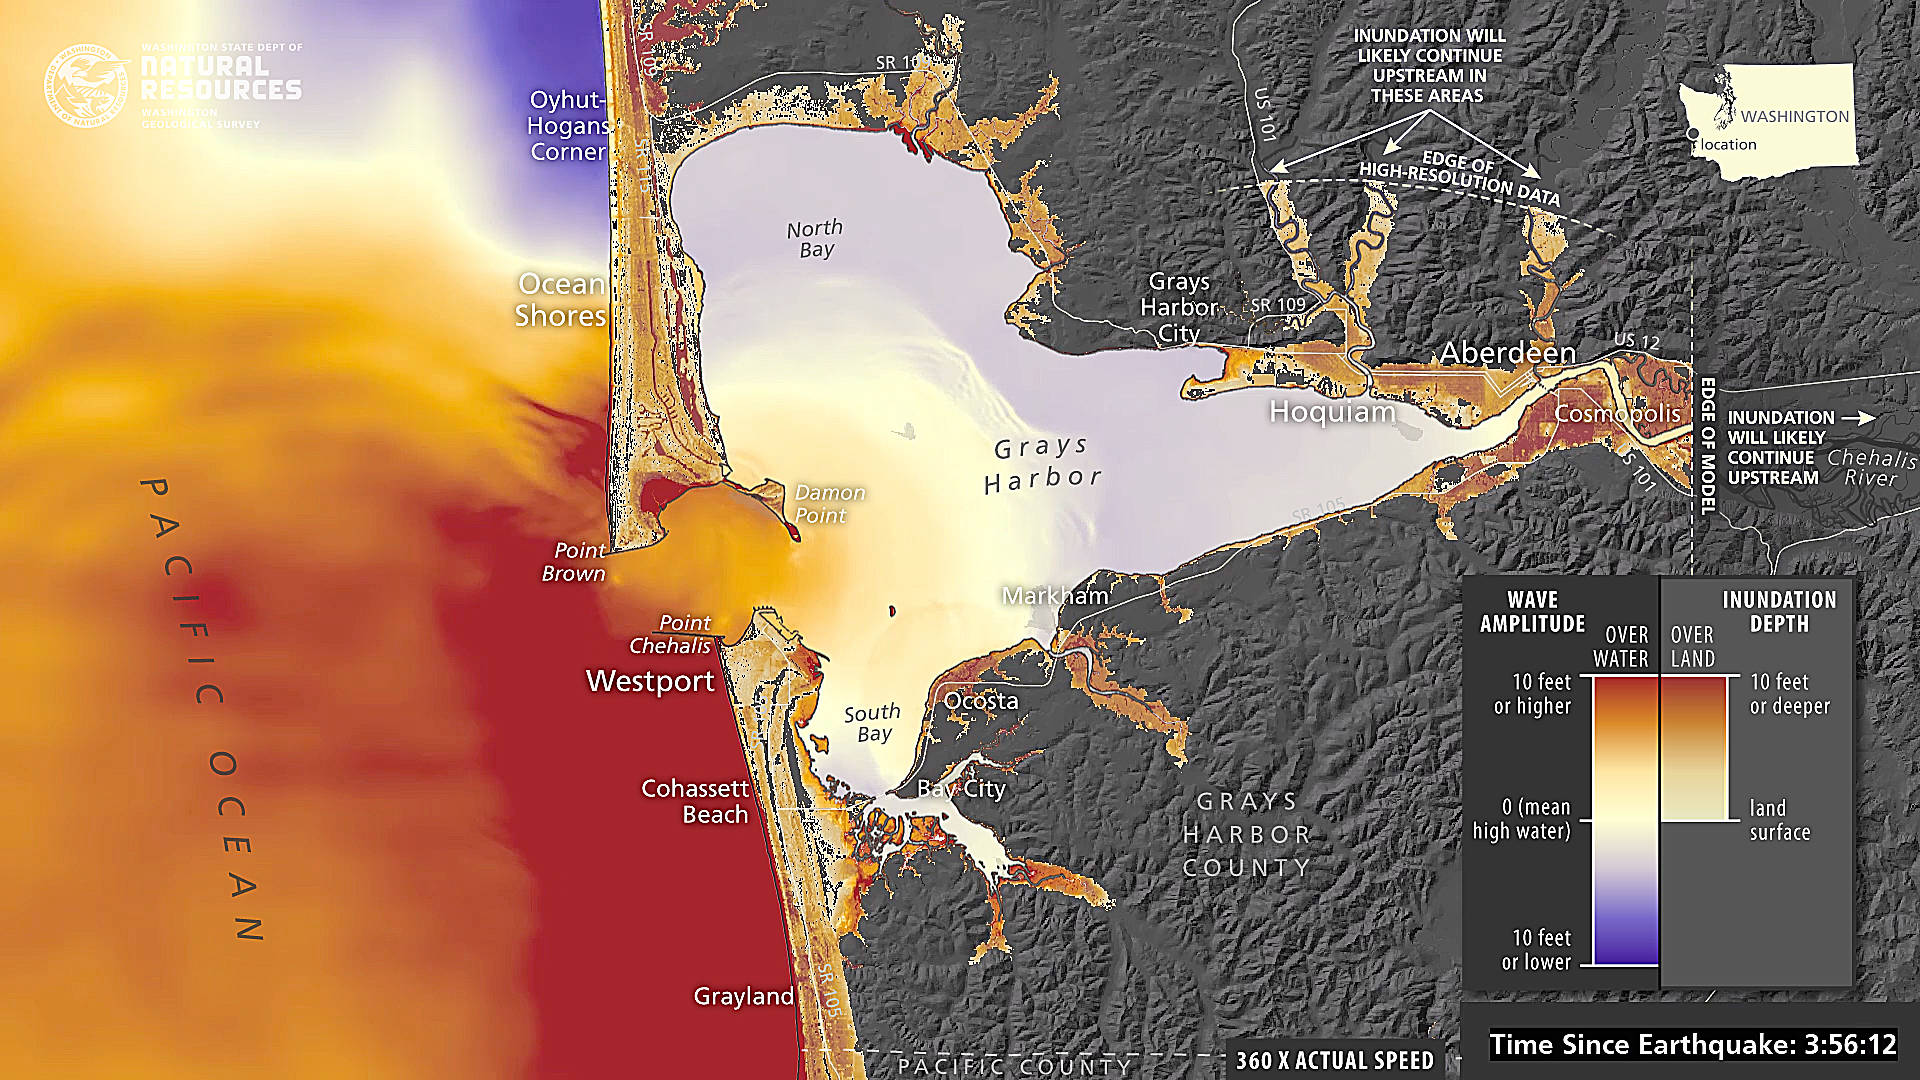 COURTESY DEPARTMENT OF NATURAL RESOURCES                                 The newly-released Grays Harbor tsunami inundation video here shows water levels about four hours after a Cascadia subduction zone 9.0 earthquake. The colors range from light yellow - little inundation - to red, which represents 10 feet or more inundation depth.